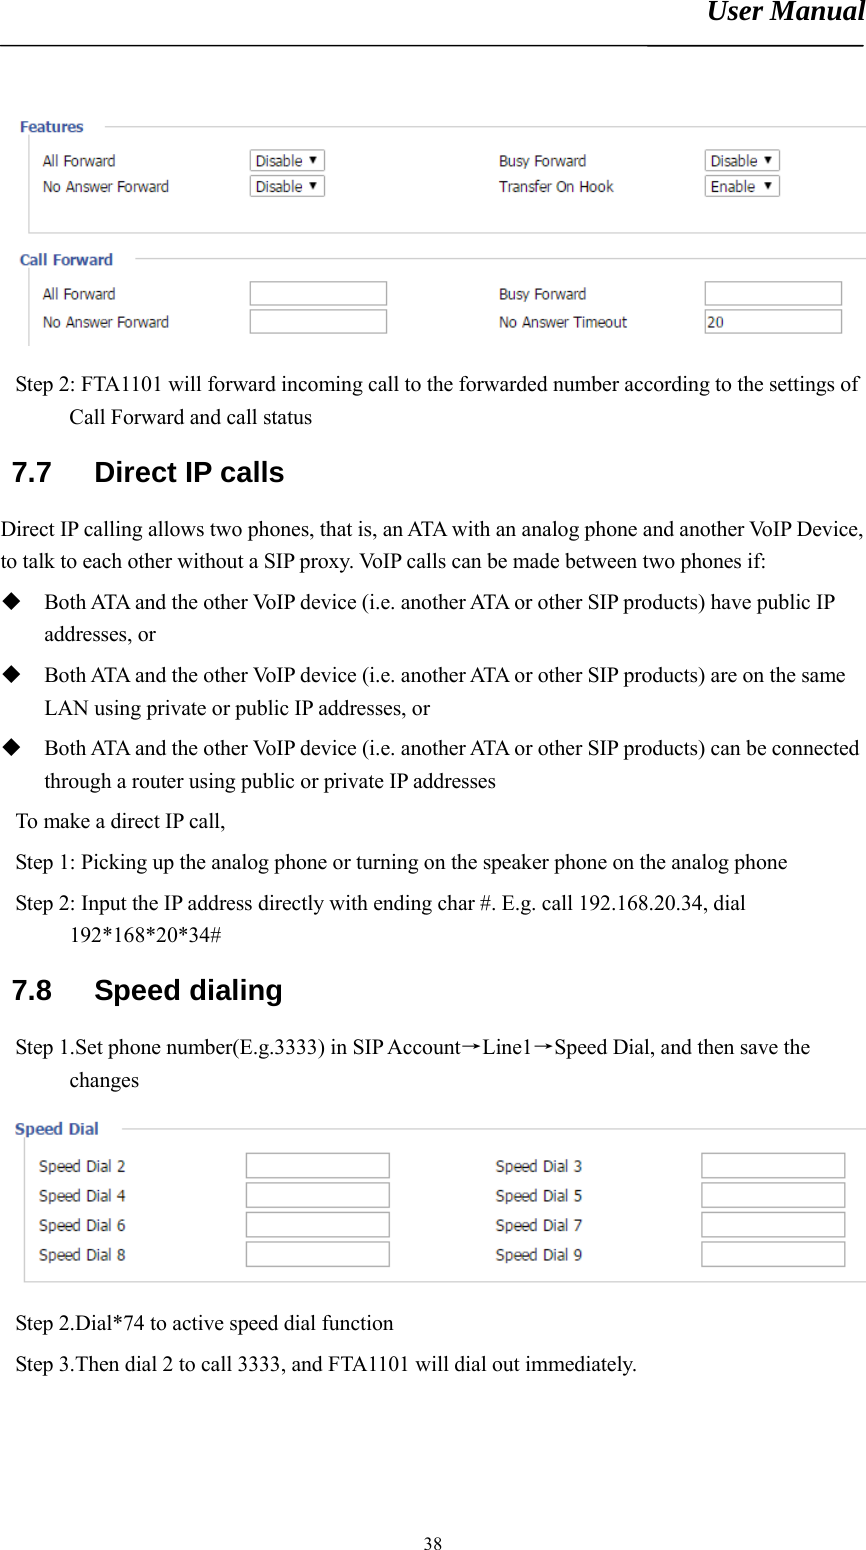 User Manual       38 Step 2: FTA1101 will forward incoming call to the forwarded number according to the settings of Call Forward and call status 7.7 Direct IP calls Direct IP calling allows two phones, that is, an ATA with an analog phone and another VoIP Device, to talk to each other without a SIP proxy. VoIP calls can be made between two phones if:  Both ATA and the other VoIP device (i.e. another ATA or other SIP products) have public IP addresses, or  Both ATA and the other VoIP device (i.e. another ATA or other SIP products) are on the same LAN using private or public IP addresses, or  Both ATA and the other VoIP device (i.e. another ATA or other SIP products) can be connected through a router using public or private IP addresses To make a direct IP call,   Step 1: Picking up the analog phone or turning on the speaker phone on the analog phone Step 2: Input the IP address directly with ending char #. E.g. call 192.168.20.34, dial 192*168*20*34#  7.8 Speed dialing Step 1.Set phone number(E.g.3333) in SIP Account→Line1→Speed Dial, and then save the changes  Step 2.Dial*74 to active speed dial function Step 3.Then dial 2 to call 3333, and FTA1101 will dial out immediately. 